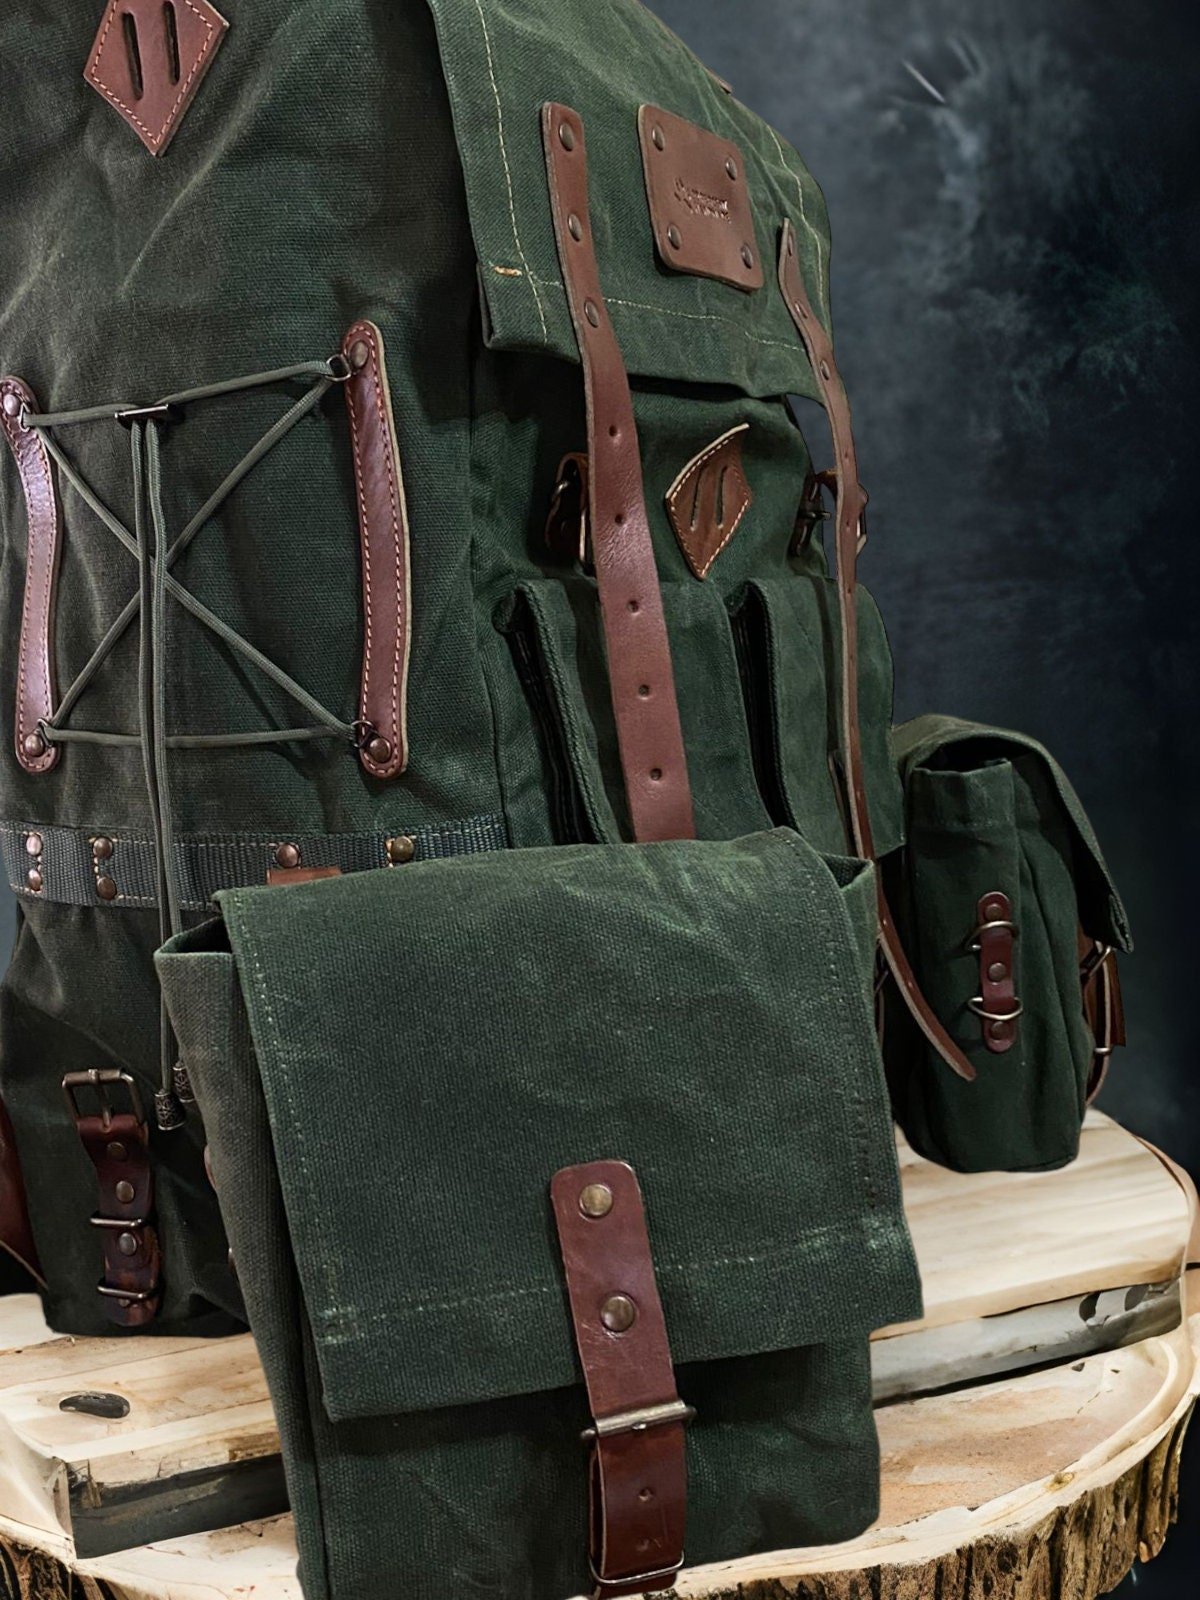 Handmade Waxed Canvas Leather Backpack | Detachable Pouches | 50 L | Daily Use | Bushcraft, Travel, Camping, Hunting, Fishing, Sports bag  99percenthandmade   